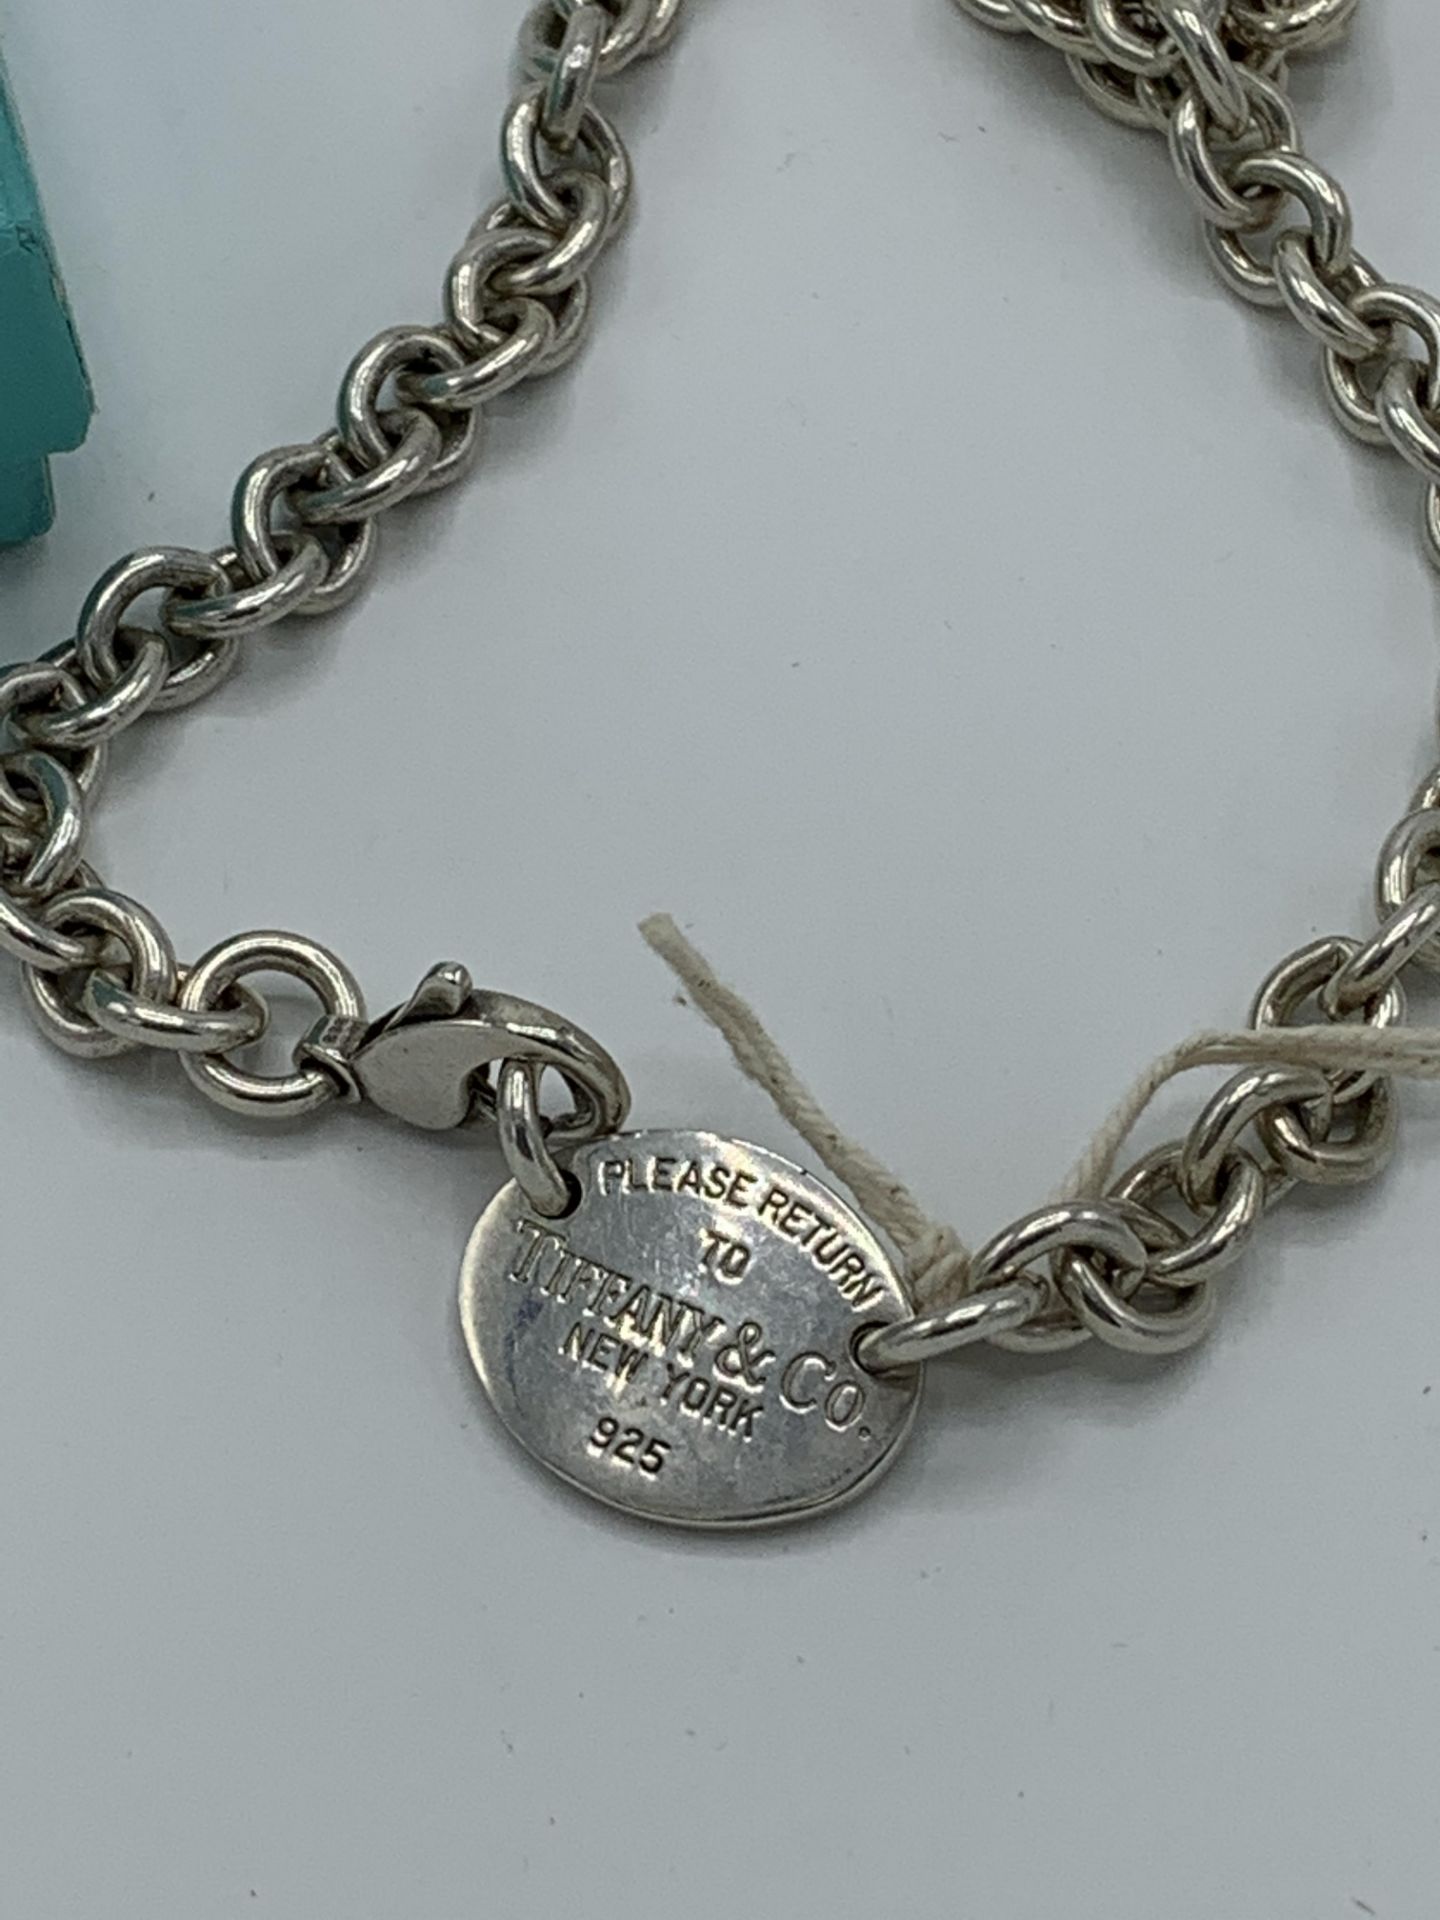 925 silver Tiffany necklace complete with label marked ""please return to Tiffany & Co New York"" - Image 2 of 3